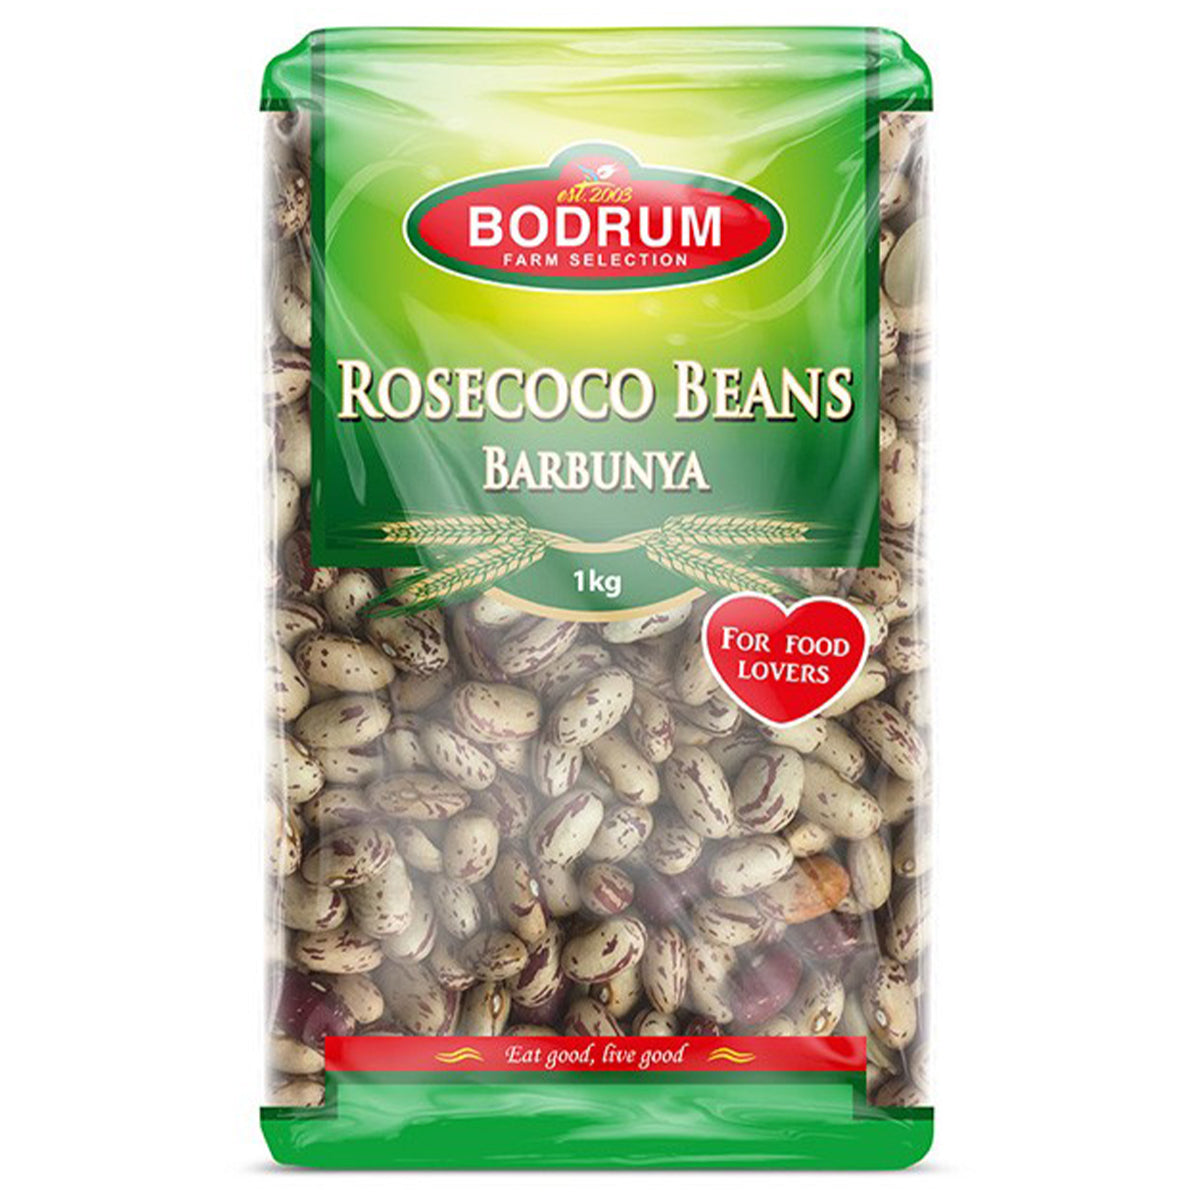 A bag of Bodrum - Rosecoco Beans - 1kg in a white background.